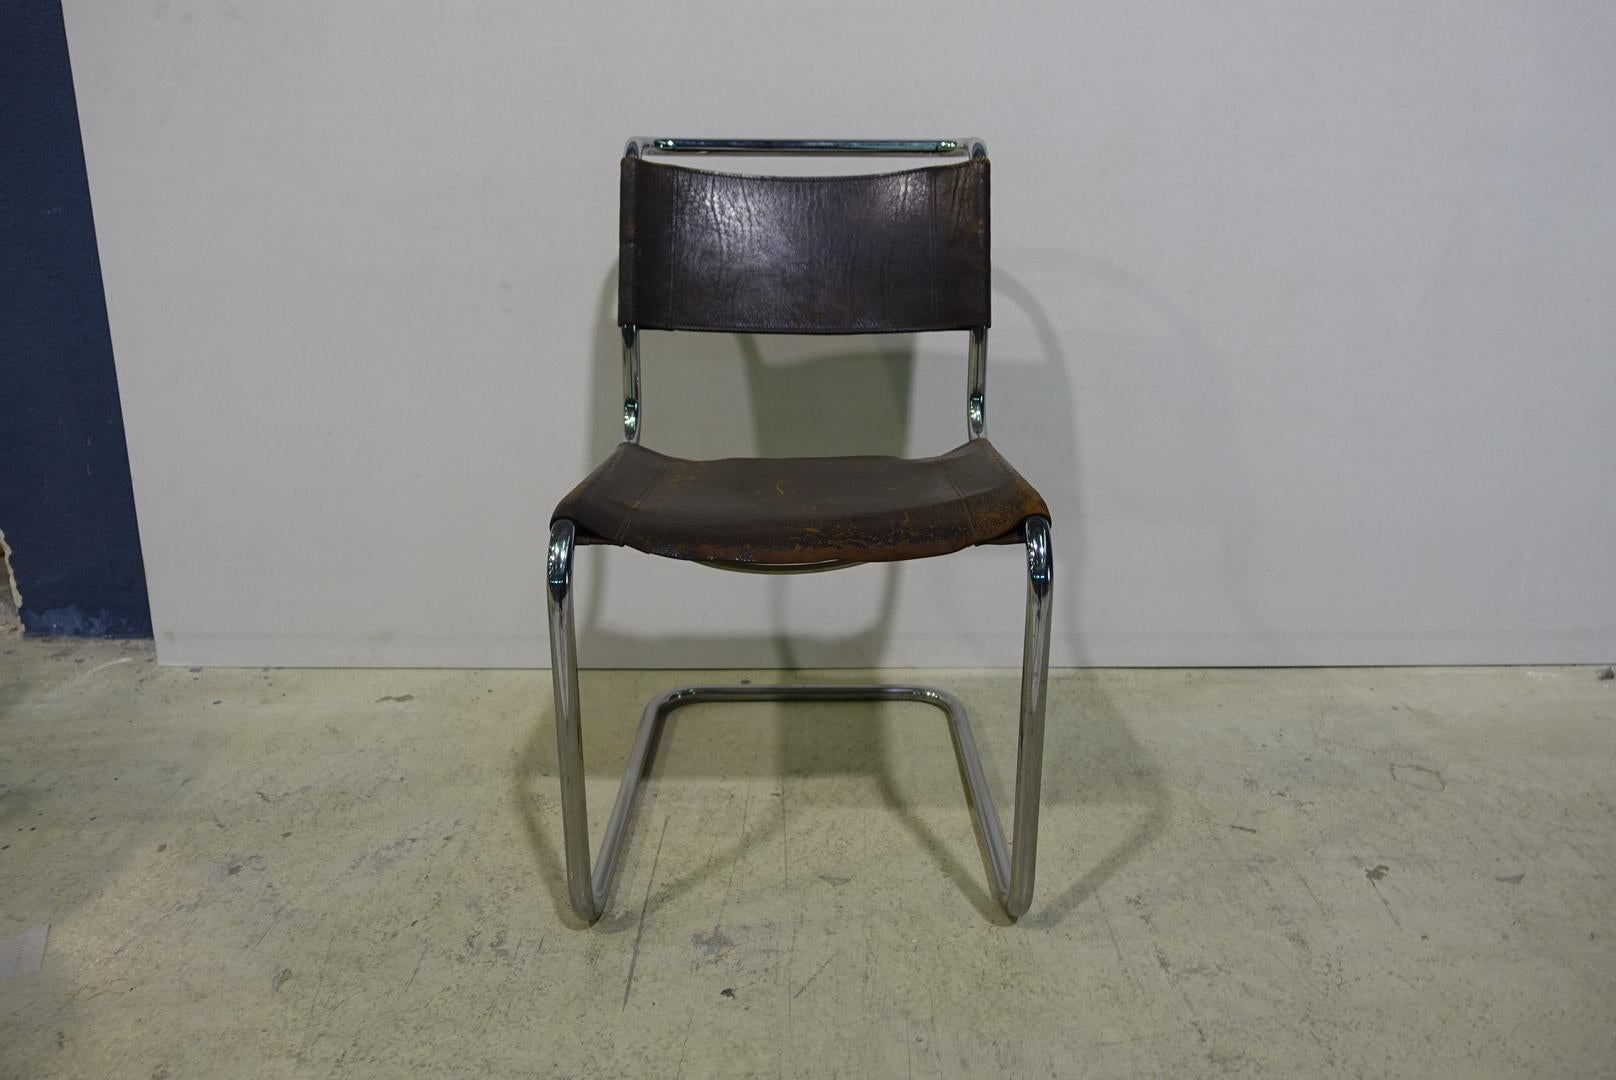 Plated Set of 4 Thonet S33 Buffalo Leather Chromed Dining Chairs by Mart Stam, 1926